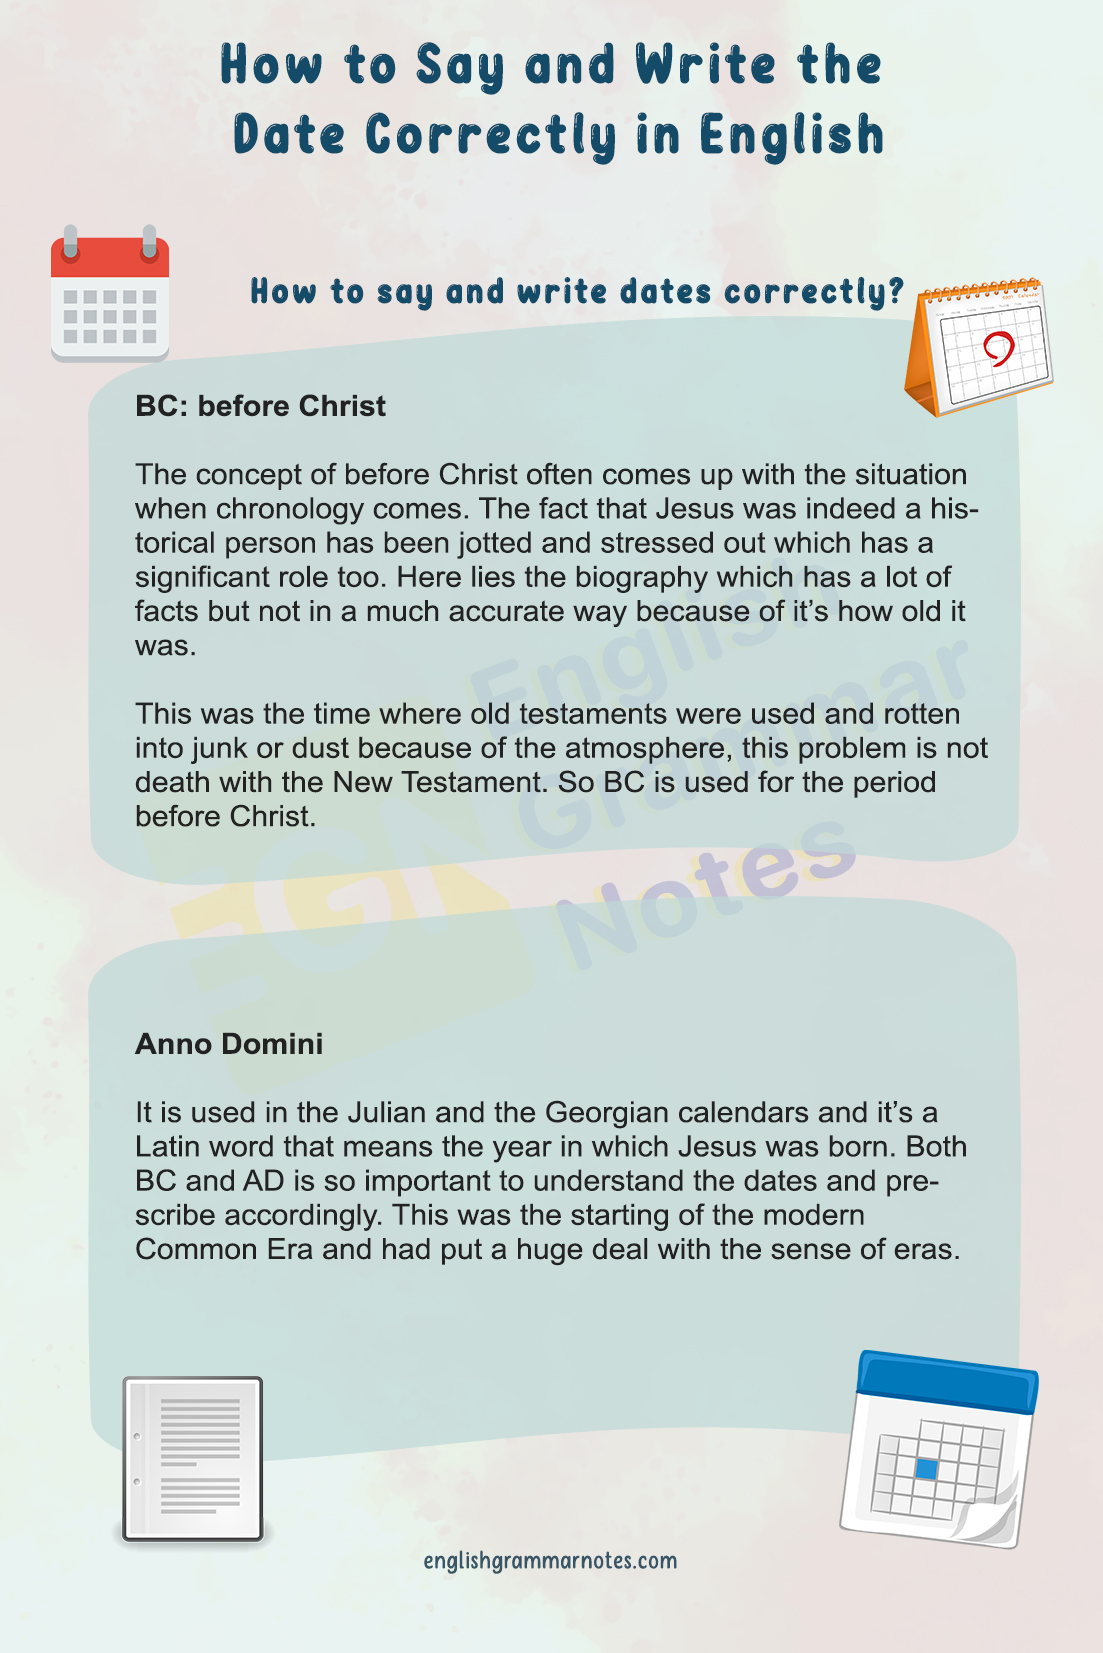 How to Say and Write the Date Correctly in English 2